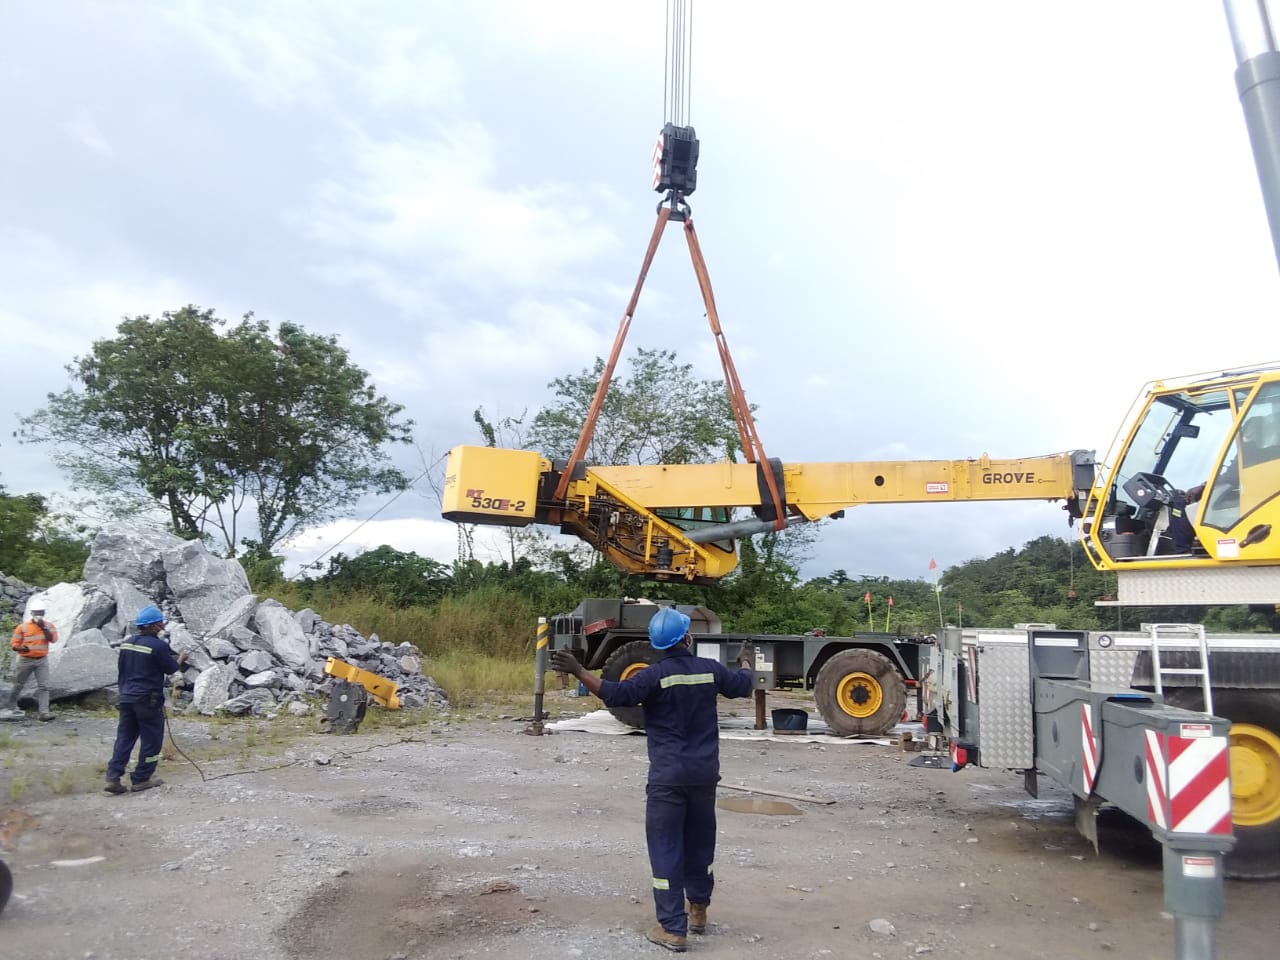 Fixing the super structure of the Grove RT 530E-2 in position after the slew ring change